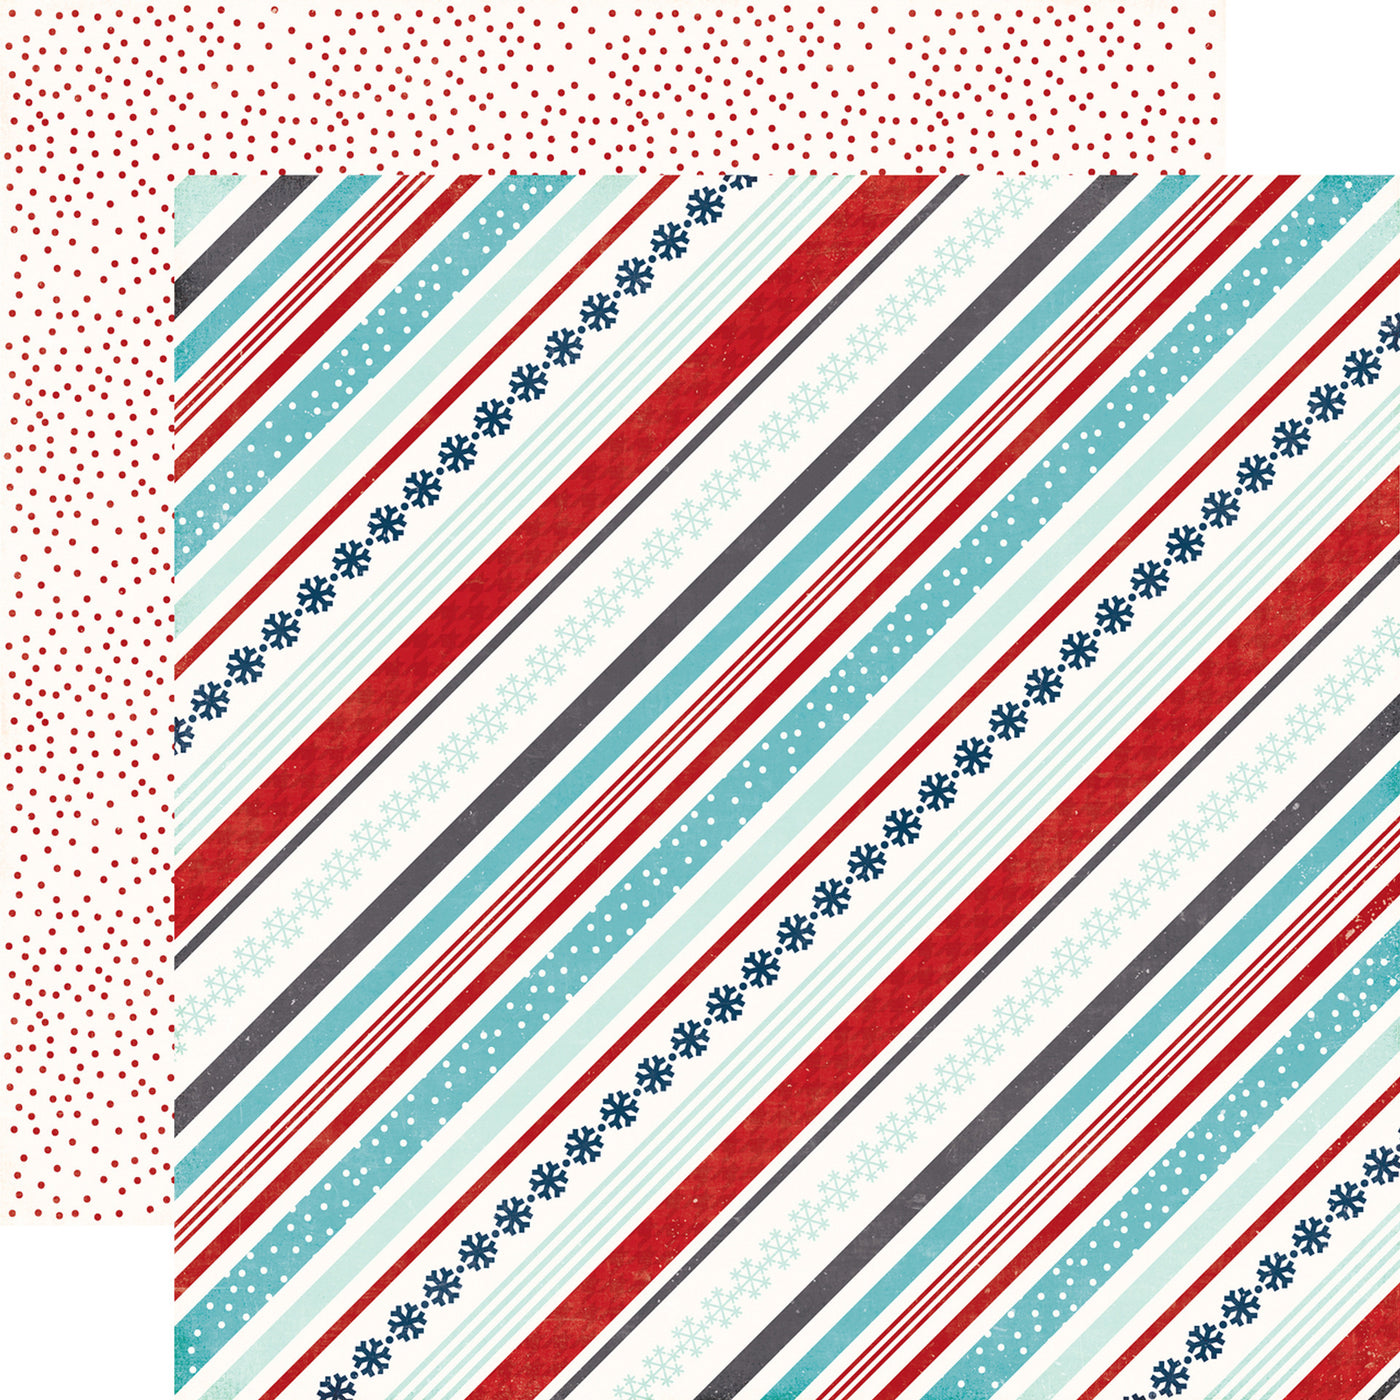 Winter patterns on two sides. (Side A - diagonal patterned stripes in reds and blues on a white background, Side B - scattered red polka dots all over on a white background)